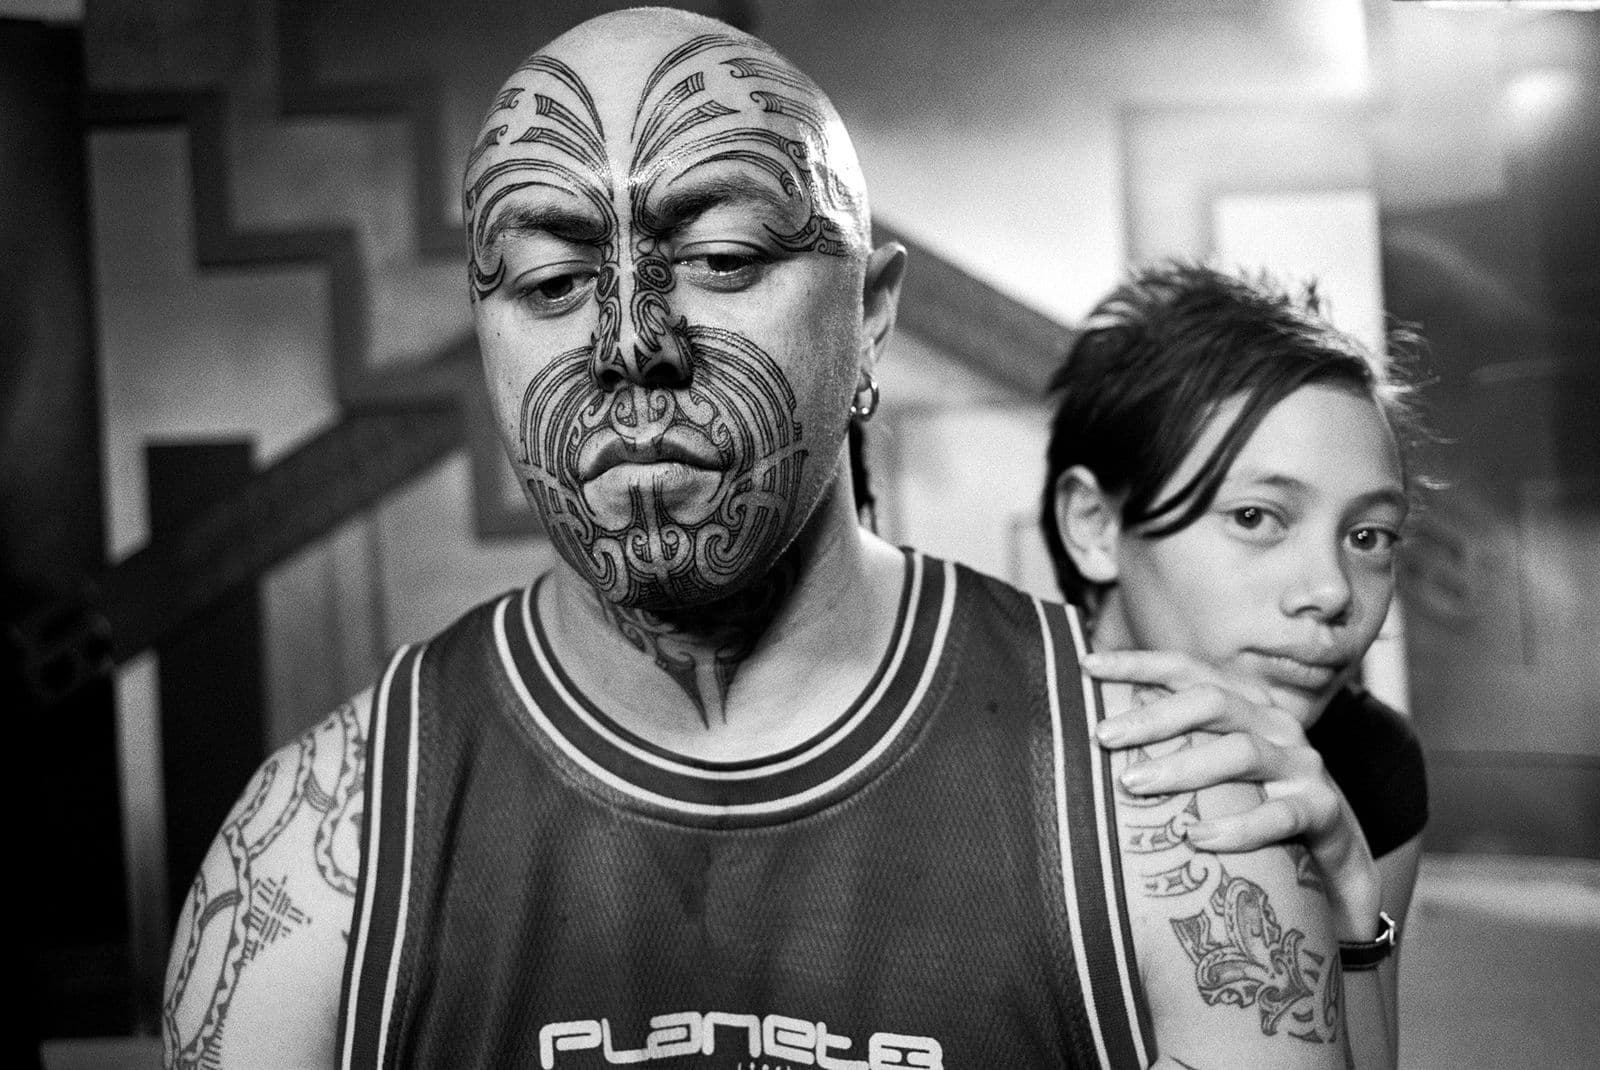 A black and white photo of a man with Moari facial tattoos with a young woman standing behind him, looking over his shoulder